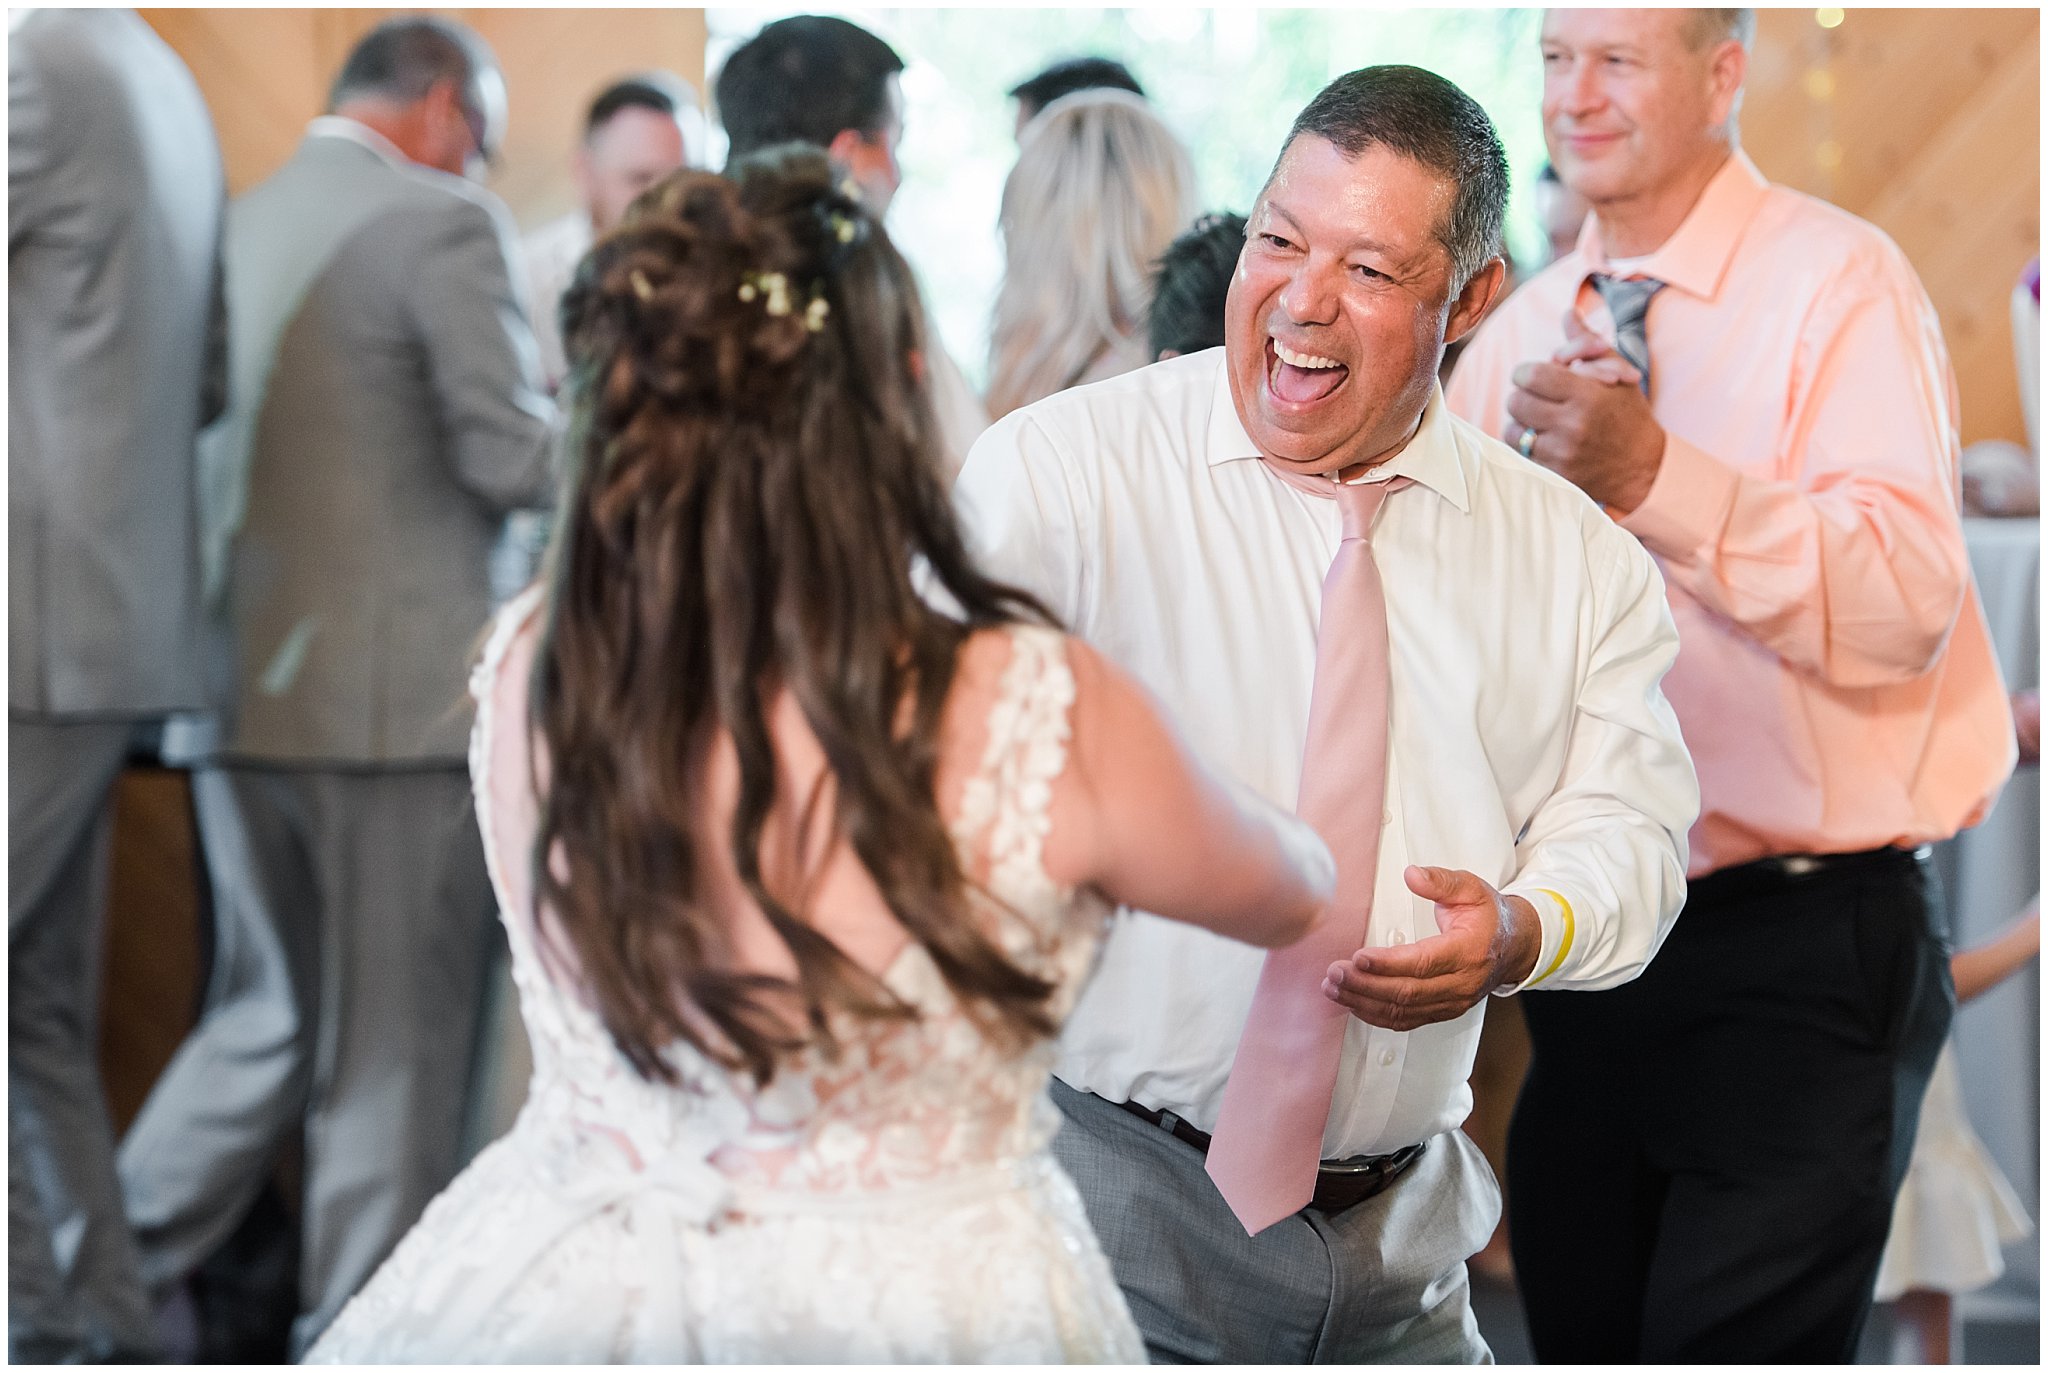 Bride dancing with father during party dancing | Oak Hills Utah Dusty Rose and Gray Summer Wedding | Jessie and Dallin Photography